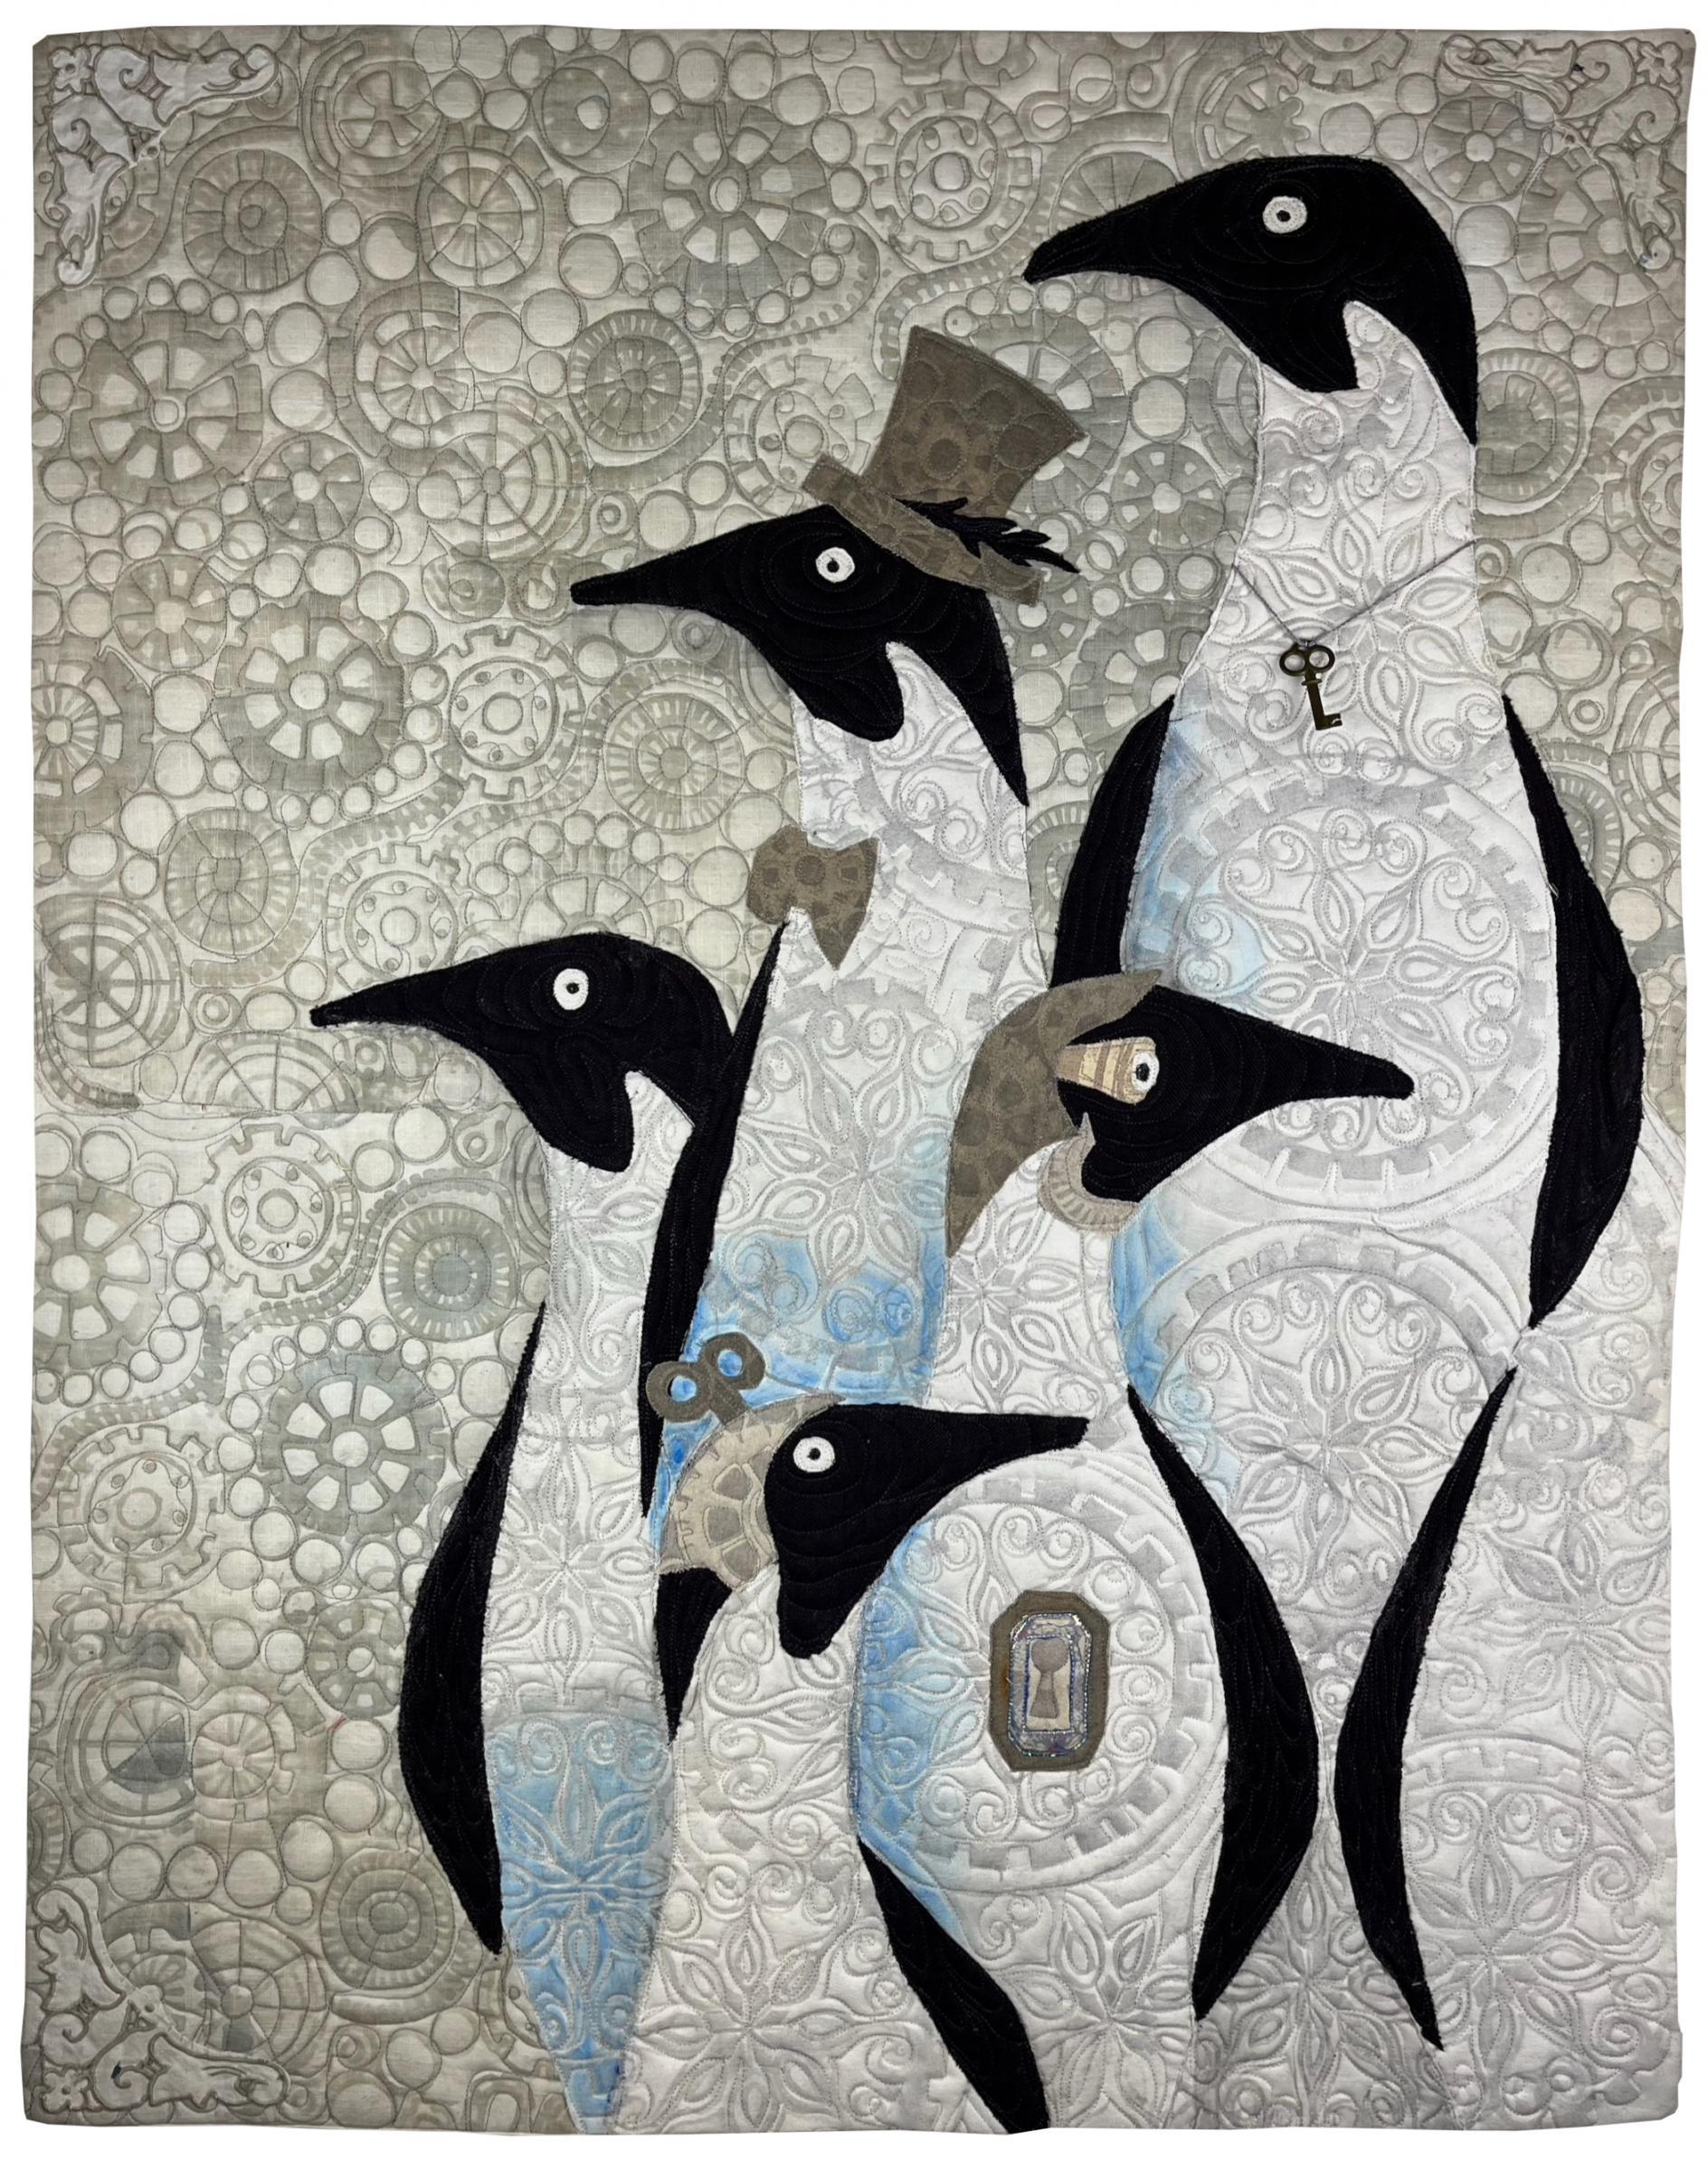  Jeannie Palmer Moore - A Waddle of Penguins